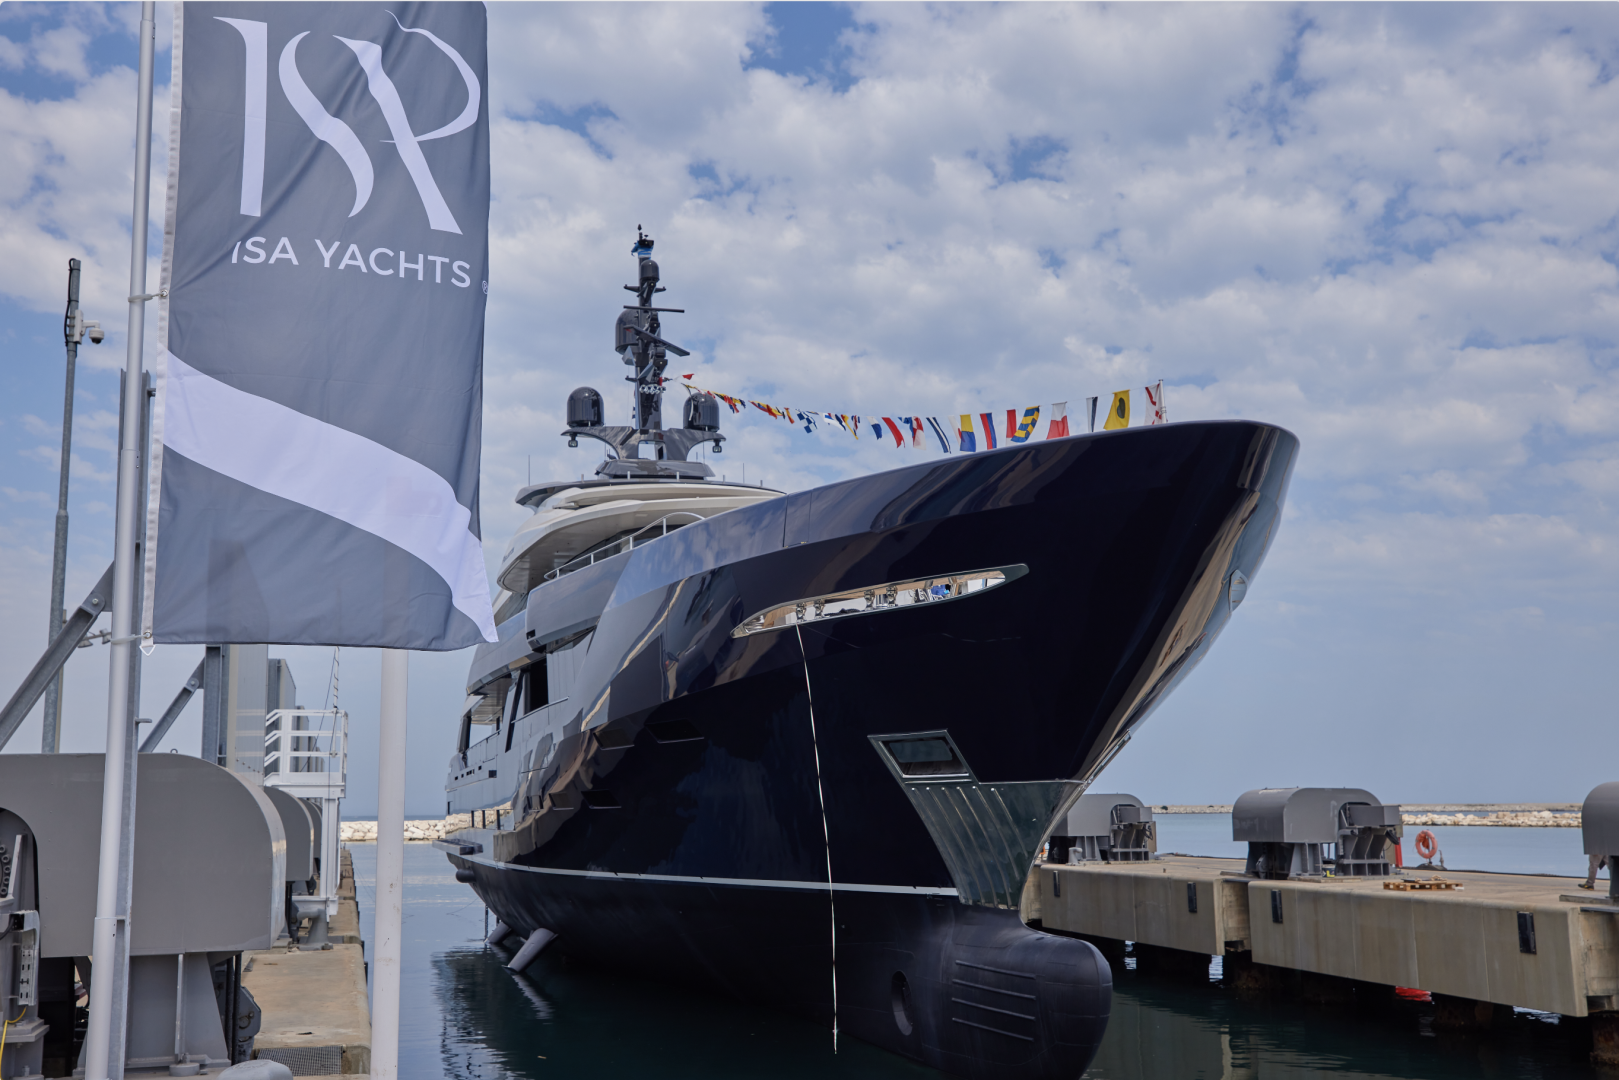 Isa Yachts announces the launch of the Classic 65 m M/Y Resilience